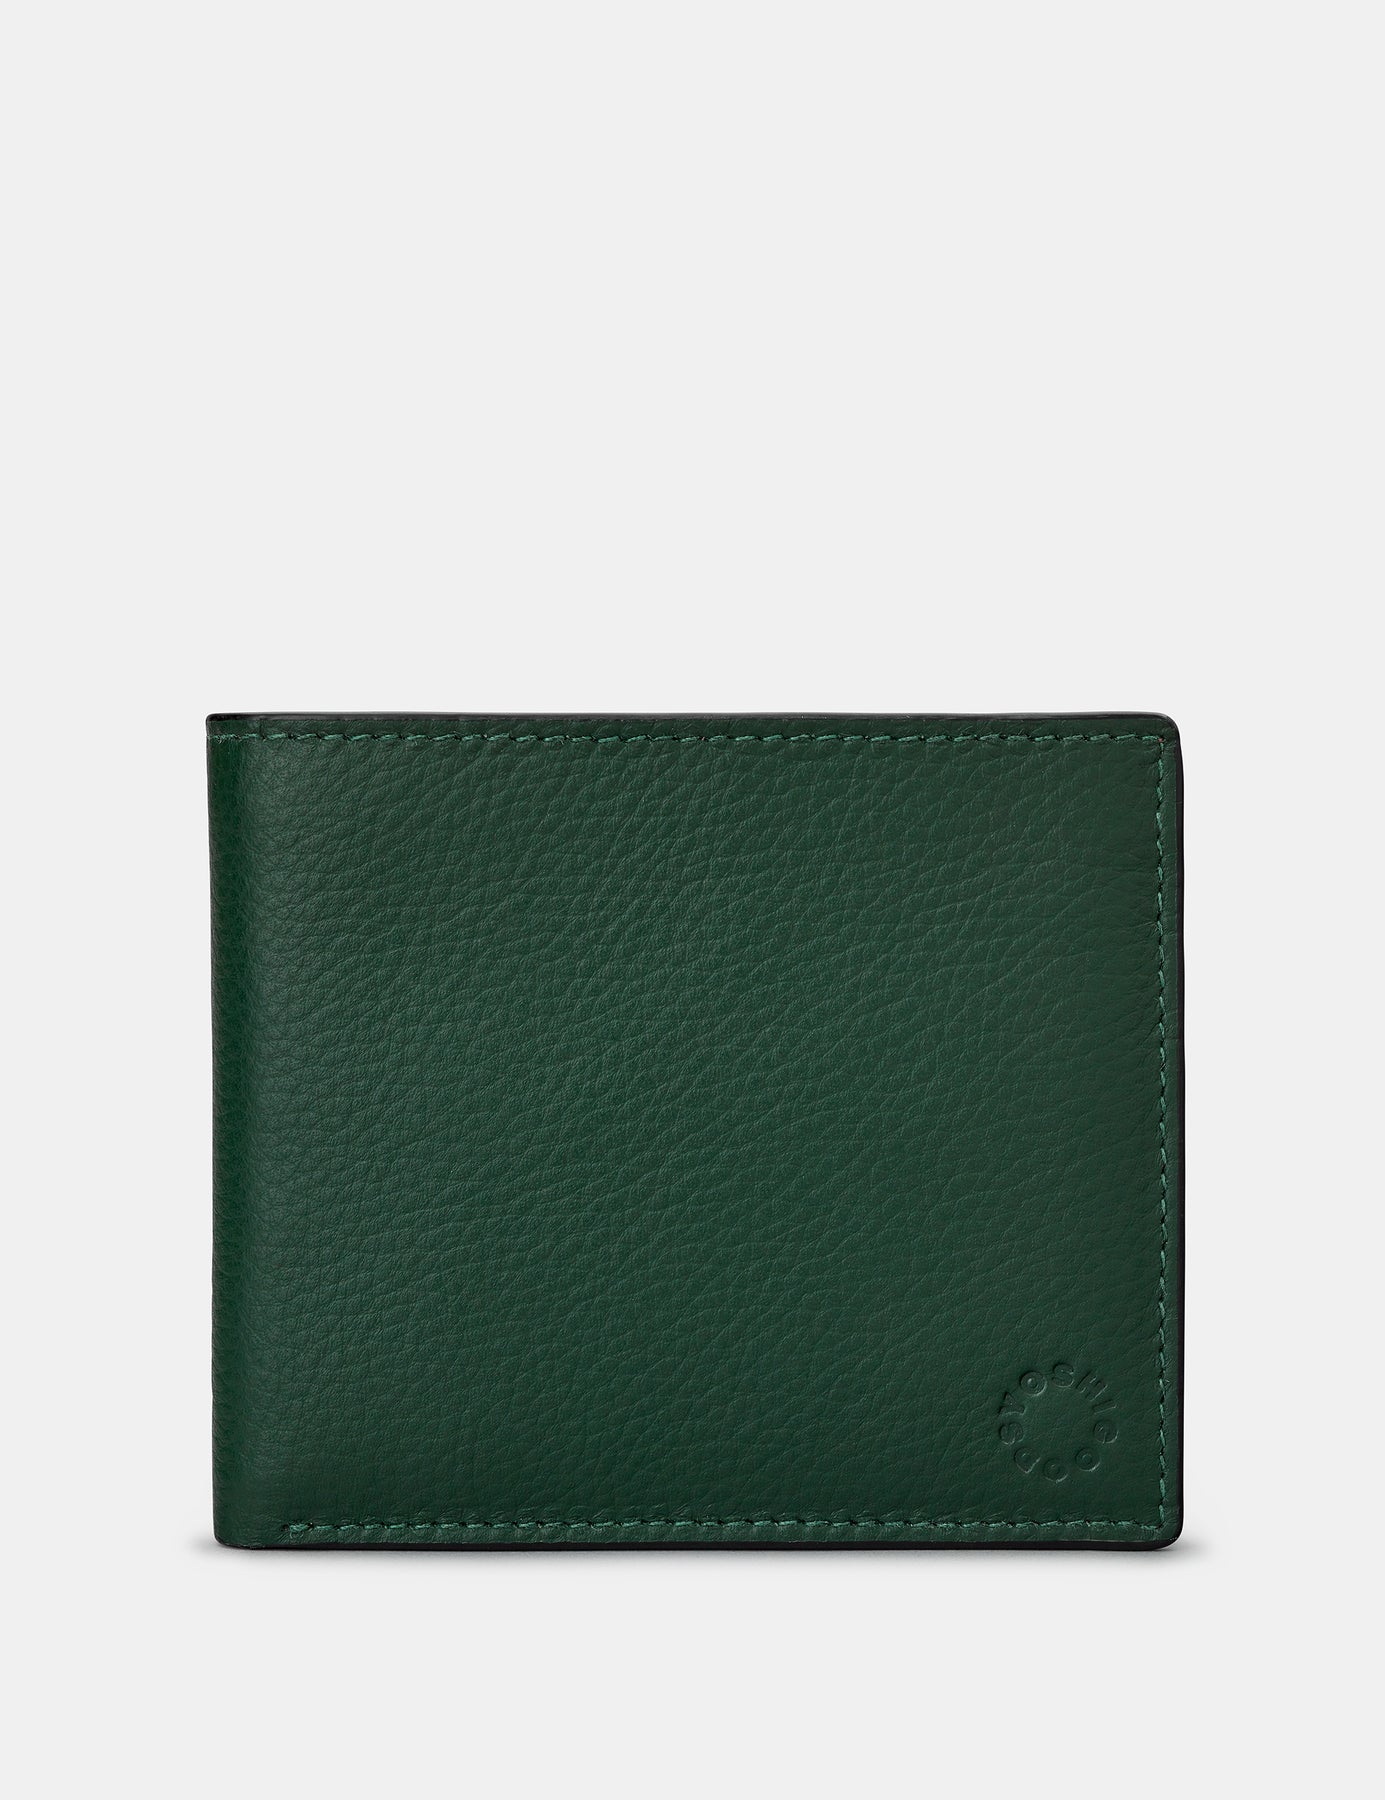 Buy Lorenz Bi-Fold Bottle Green RFID Blocking Leather Wallet for Men with  External Card Holder & Coin Pocket Feature| Soft Nappa Men's Leather Wallet  | GL-11 Online at Best Prices in India -